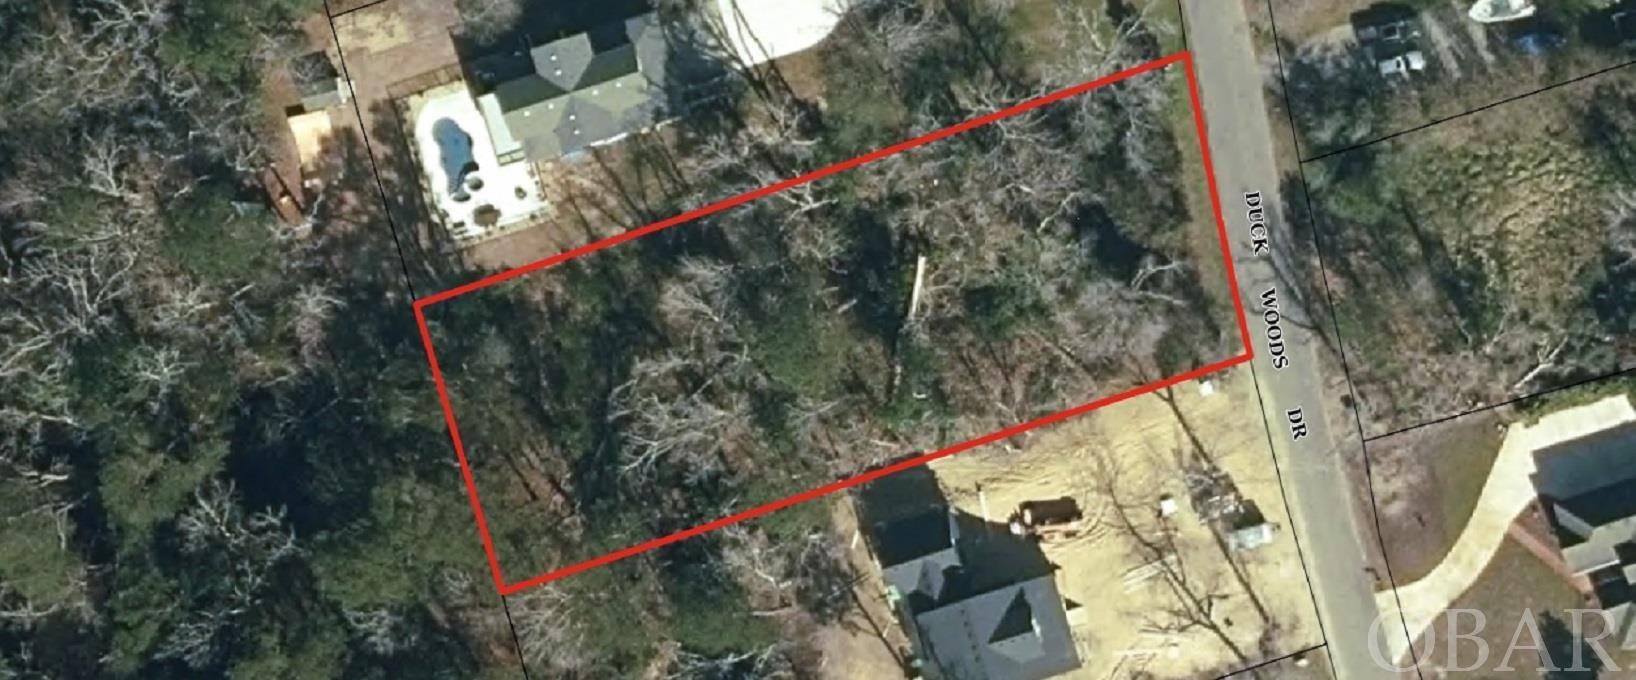 .6 Acre - Large lot in beautiful Southern Shores.  Dead end street so traffic is limited.  Close to schools, shopping and restaurants.  Community marina and tennis available for a minimal cost.  Adjacent to Duck Woods Golf Course.